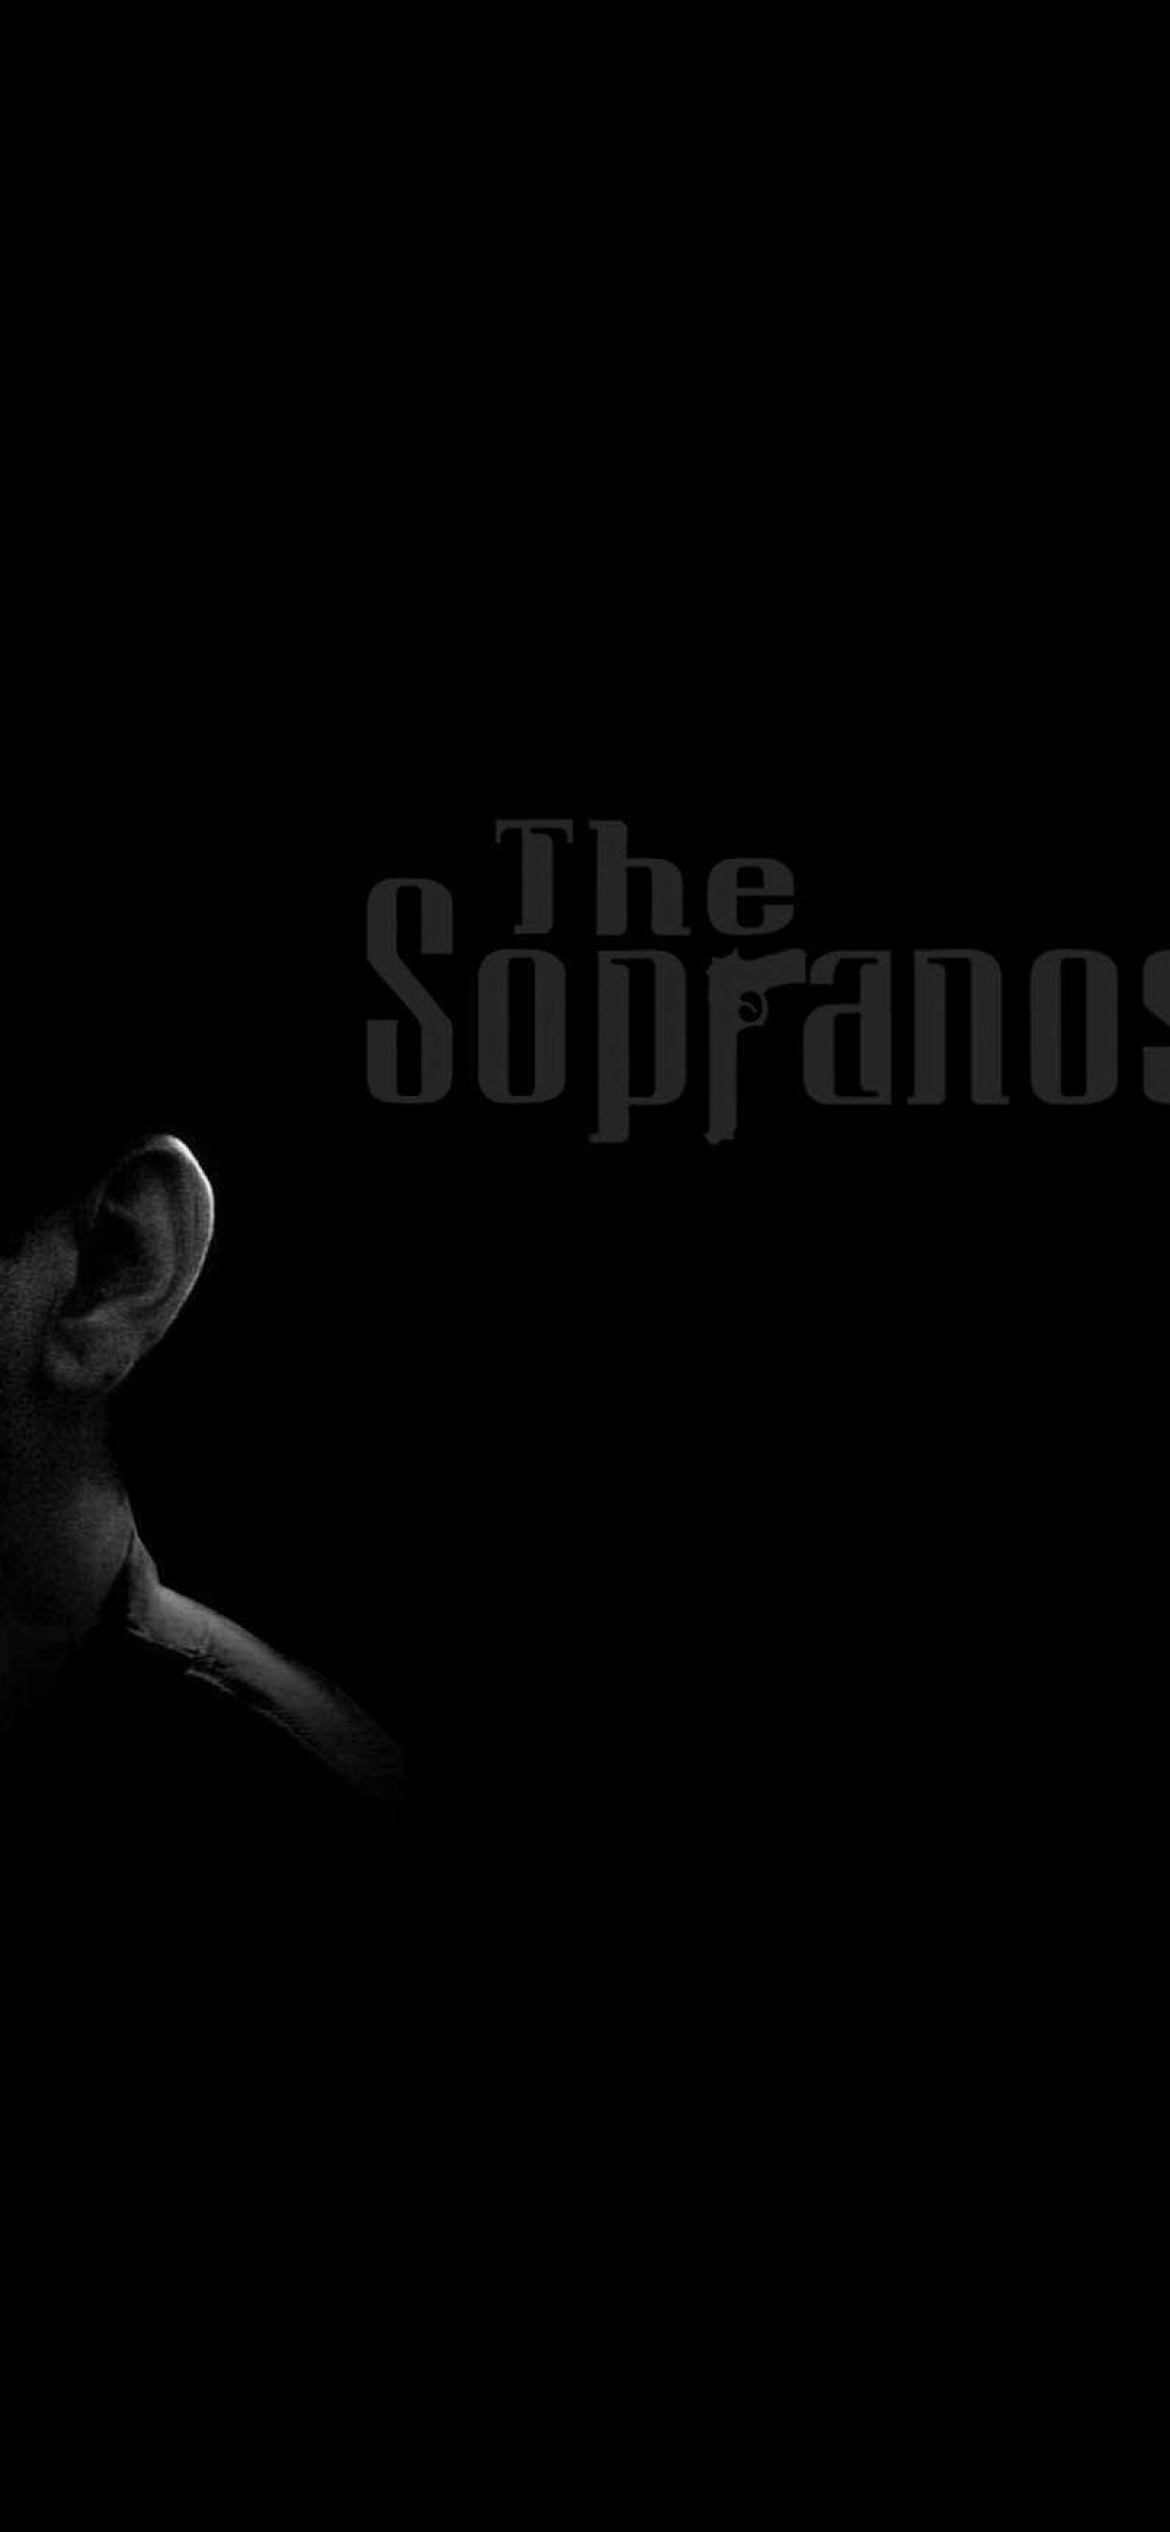 The Sopranos Wallpaper 60 images